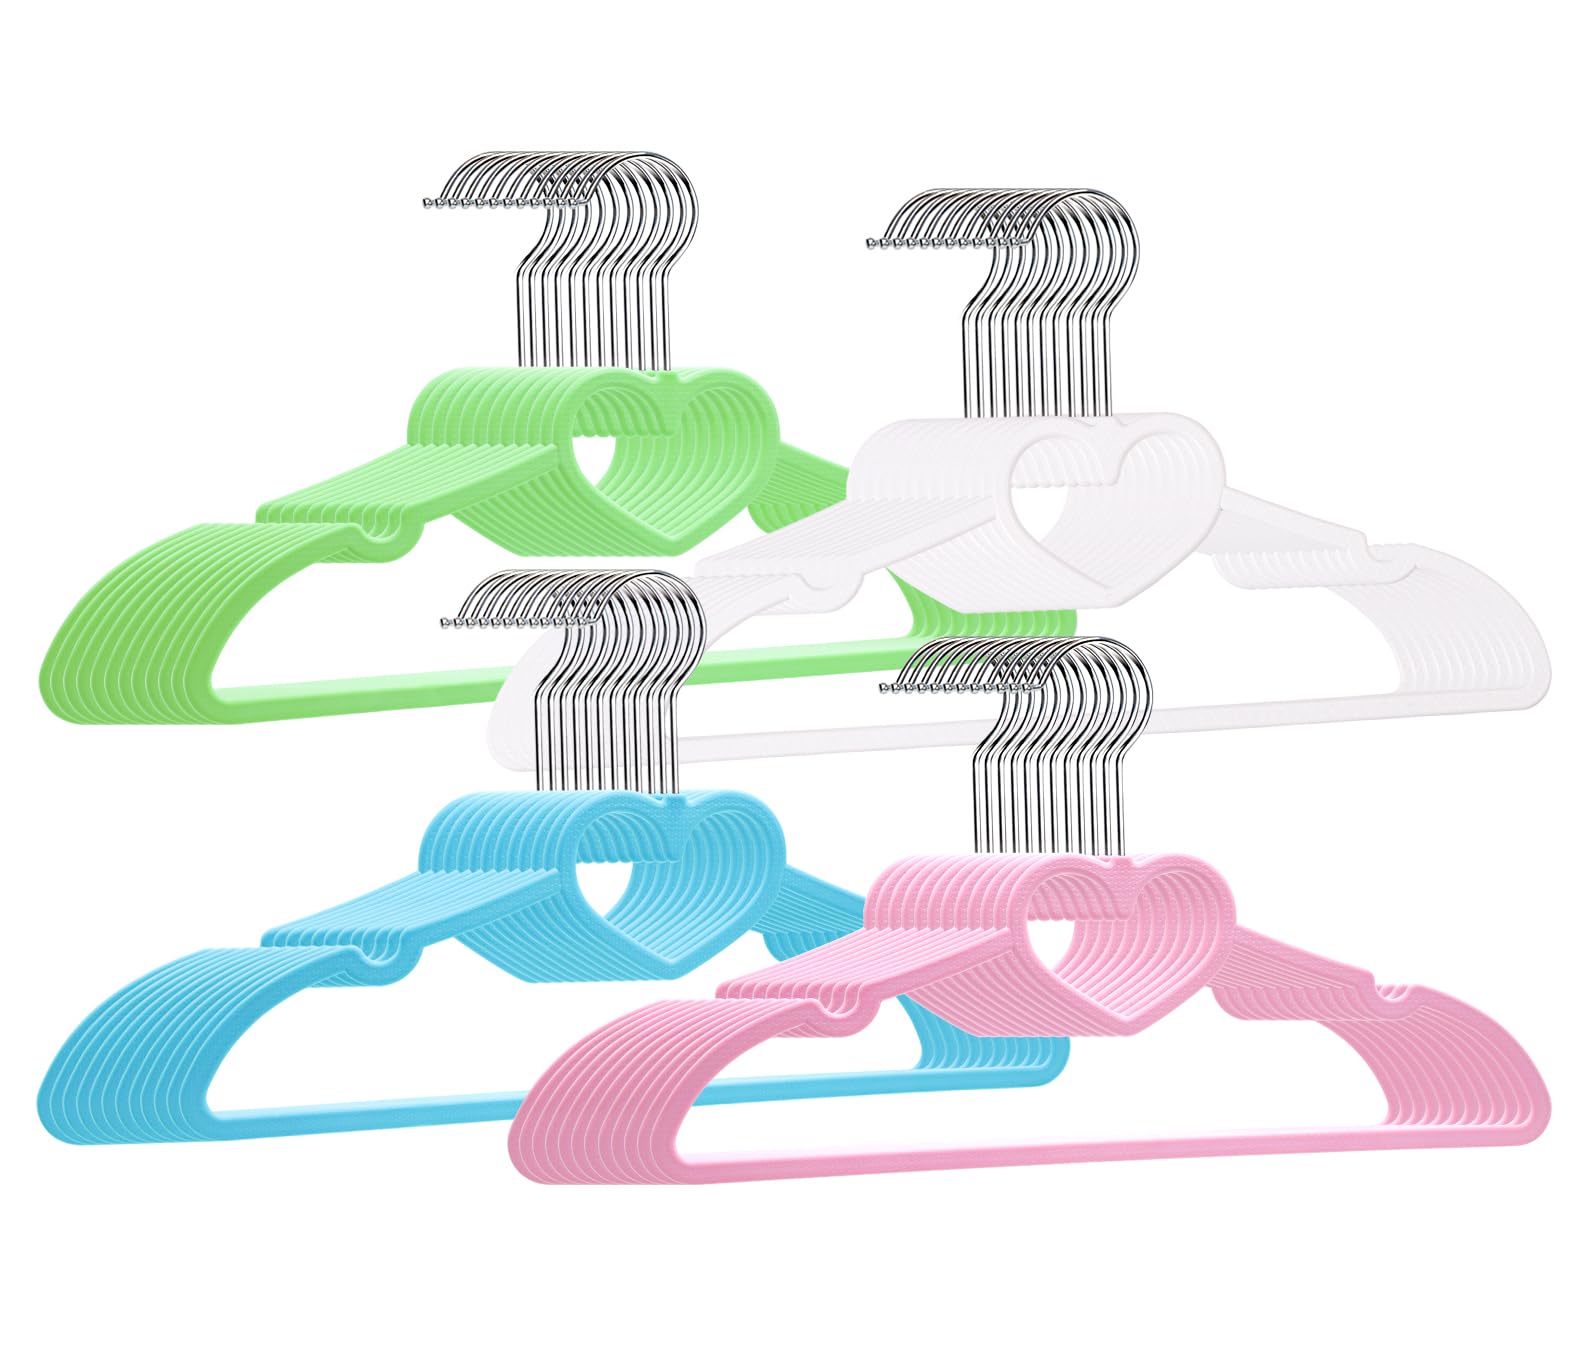 ZRKFSR Plastic Hangers 20 Pack, Heart-Shaped Clothes Hanger Ultra Thin Space Saving - Rainbow Hangers with 360 Degree Swivel Hook - Strong and Durable